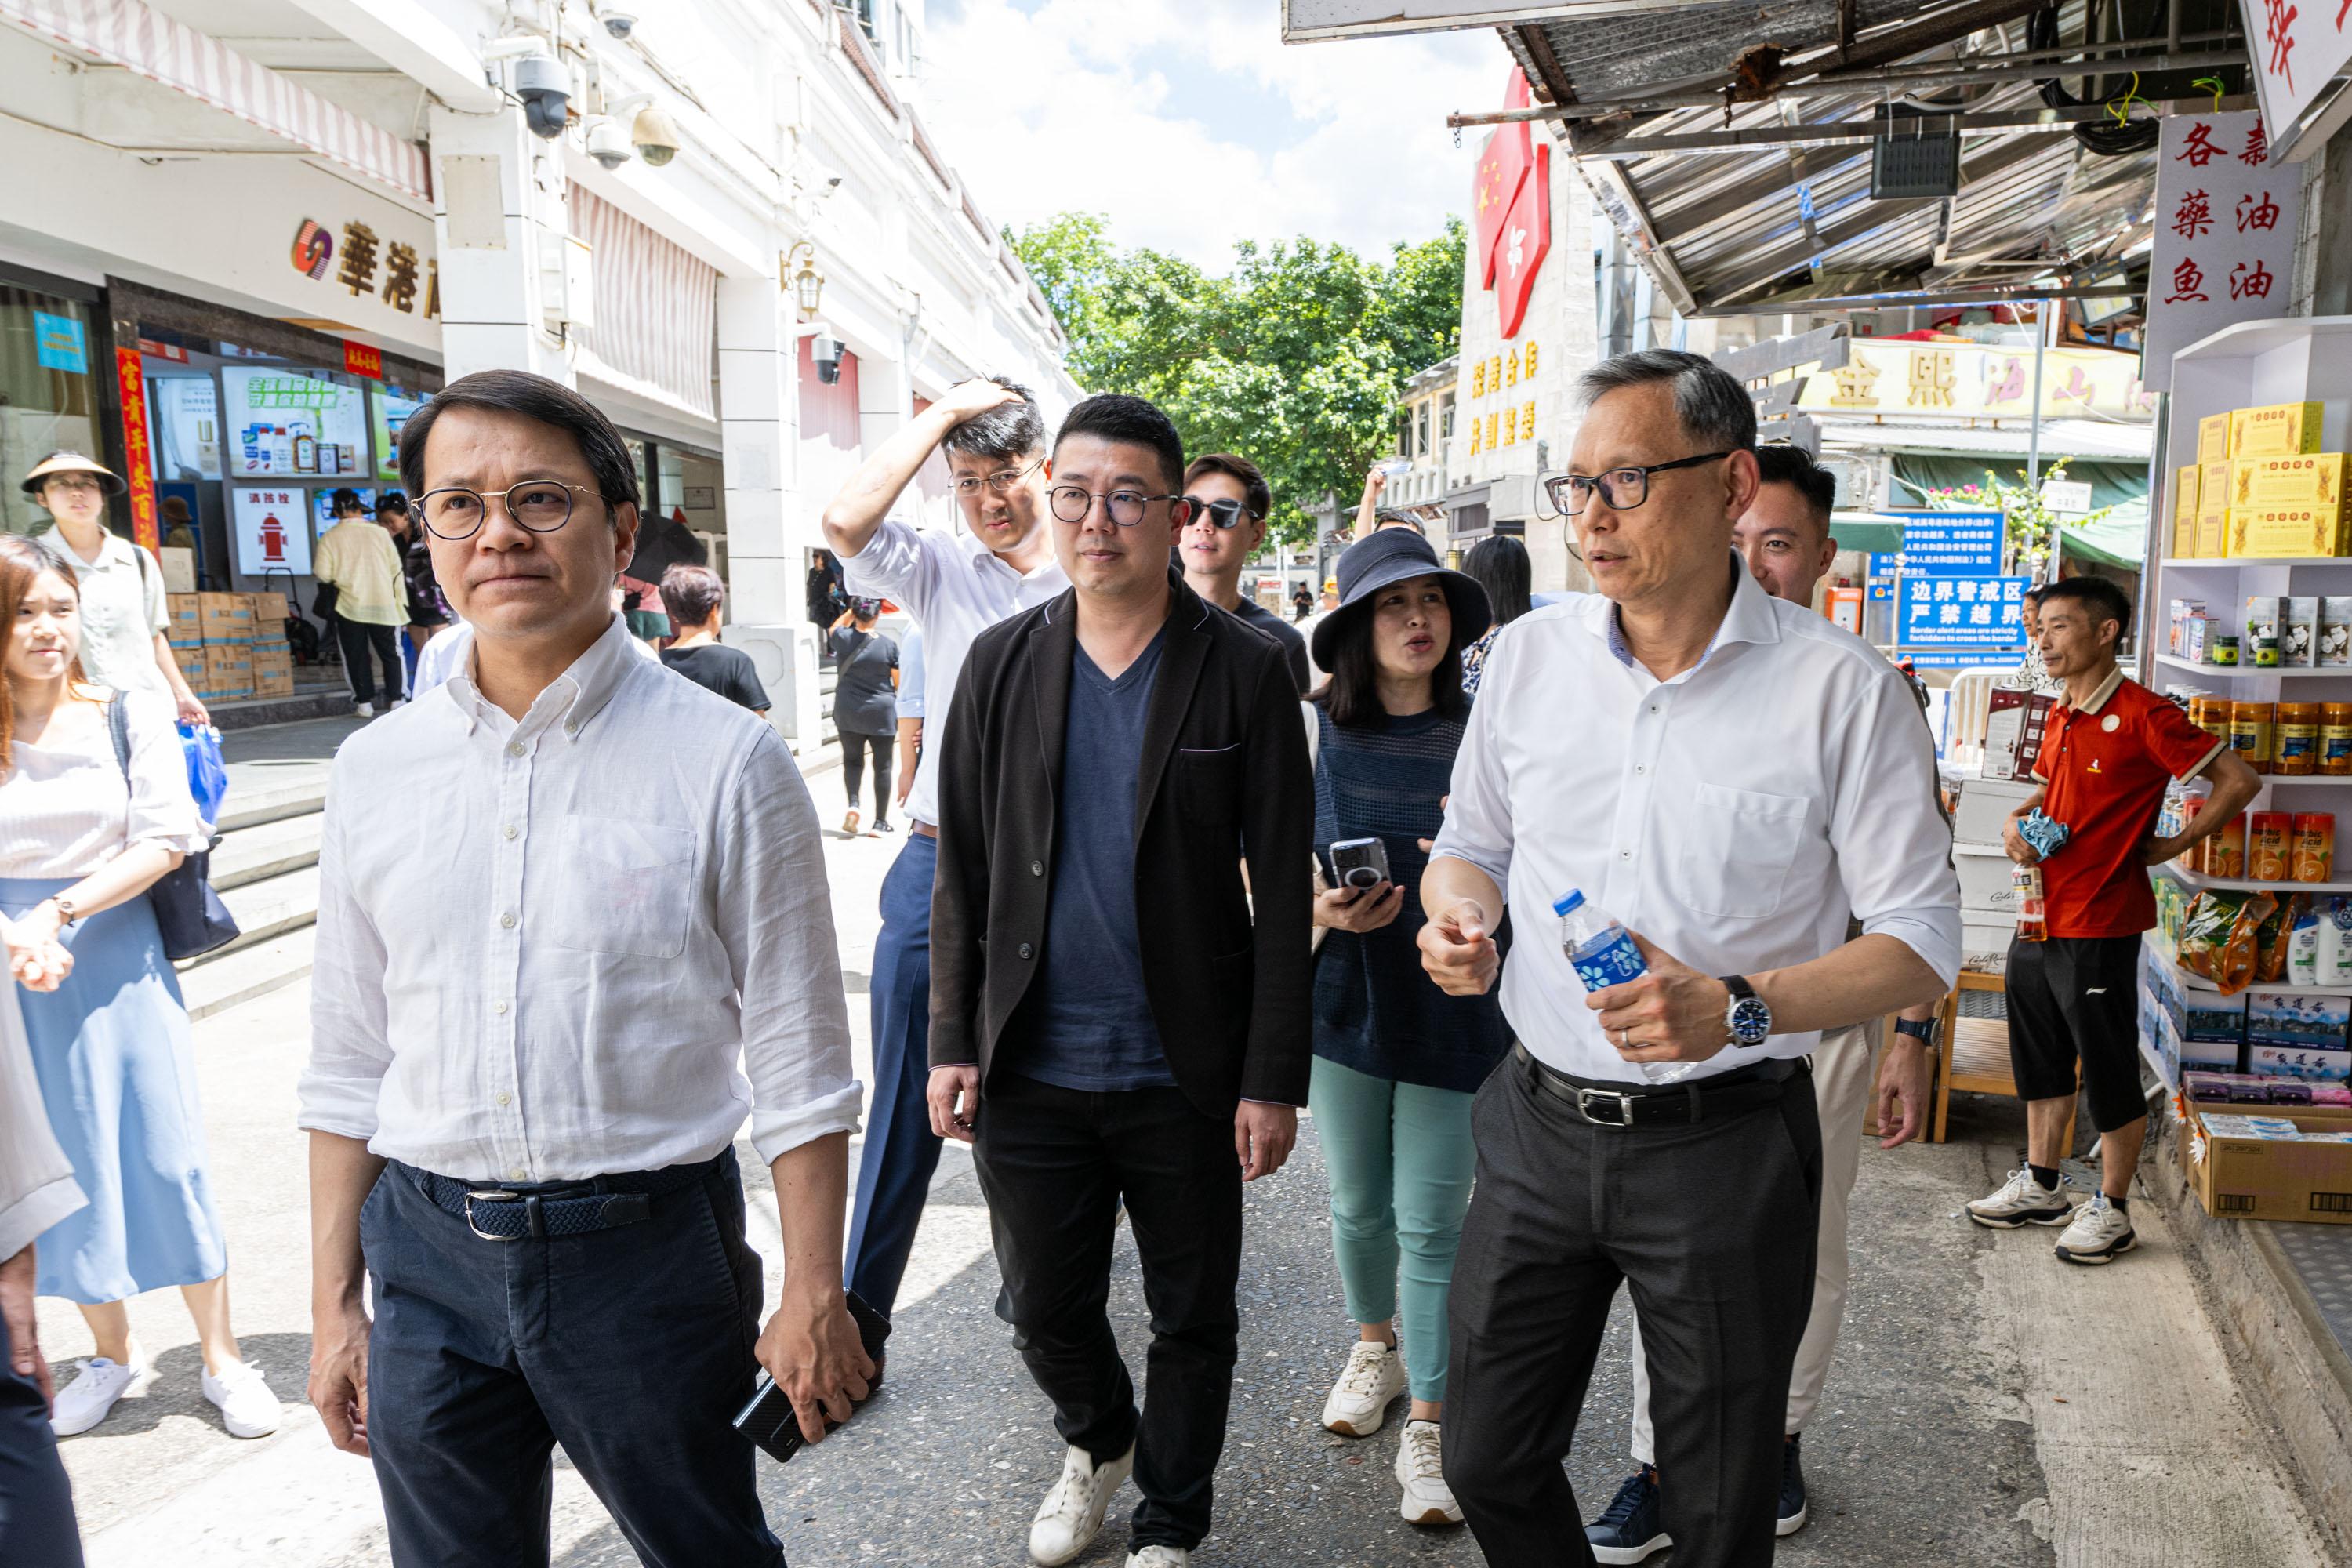 The Legislative Council (LegCo) Panel on Security visits Sha Tau Kok and Liantang/Heung Yuen Wai Boundary Control Point today (July 11). Photo shows the Chairman of the Panel on Security, Mr Chan Hak-kan (first left) and other Members visiting Chung Ying Street in Sha Tau Kok and receiving a briefing from the Under Secretary for Security, Mr Michael Cheuk (first right), on the plan to gradually open up Sha Tau Kok.